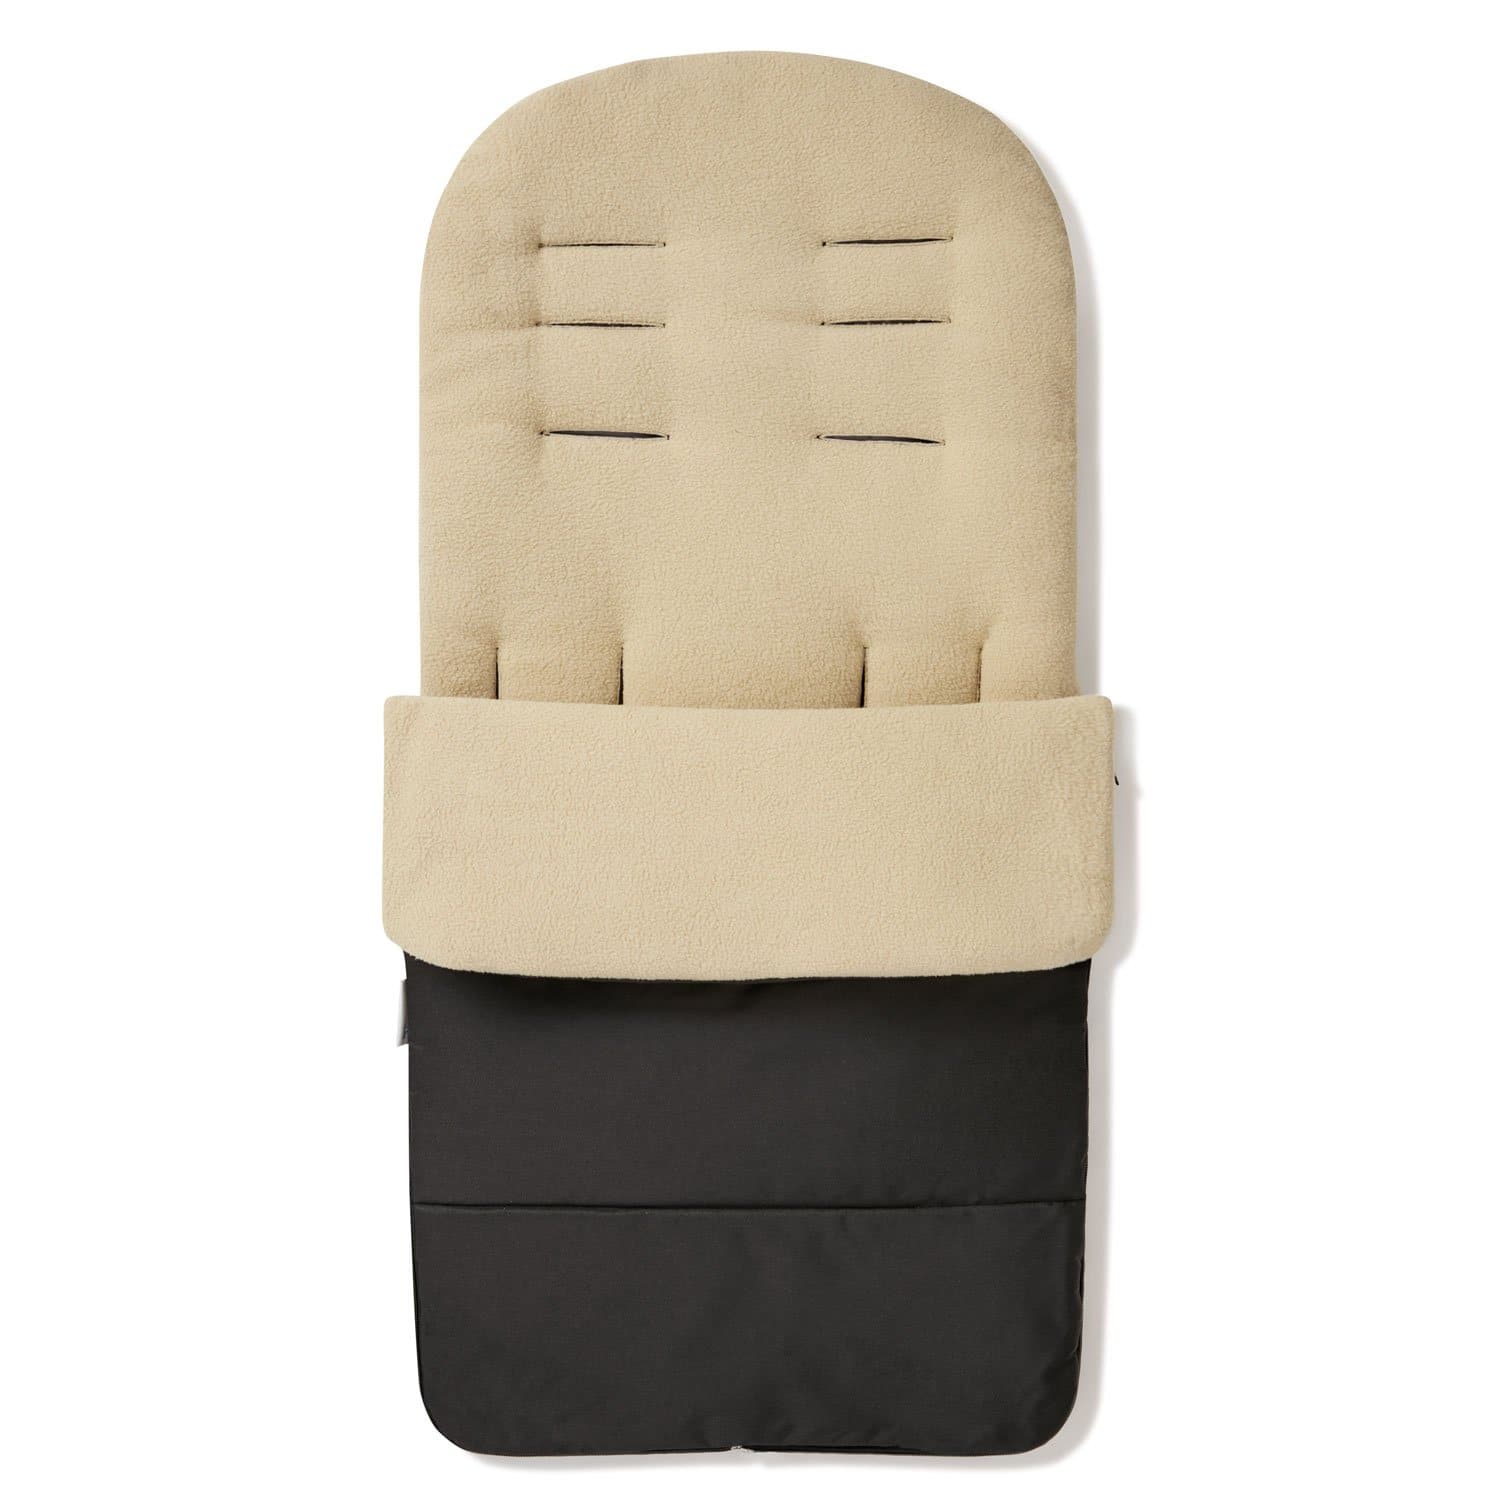 Premium Footmuff / Cosy Toes Compatible with Valco - Desert Sand / Fits All Models | For Your Little One